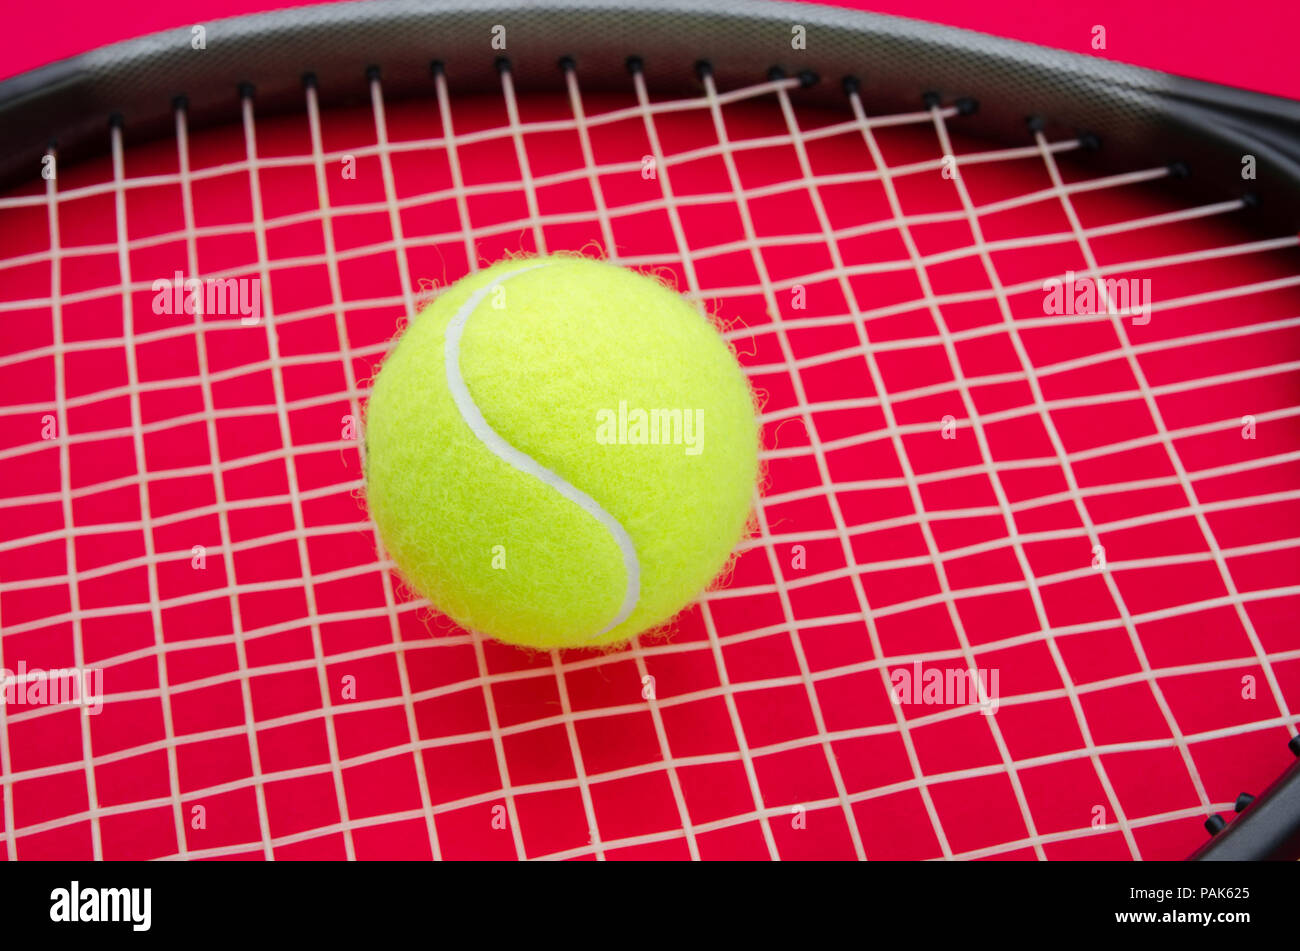 Tennis ball on a raquet with a red alerted serious background suggesting an important match set game or point in this great elegant sport Stock Photo